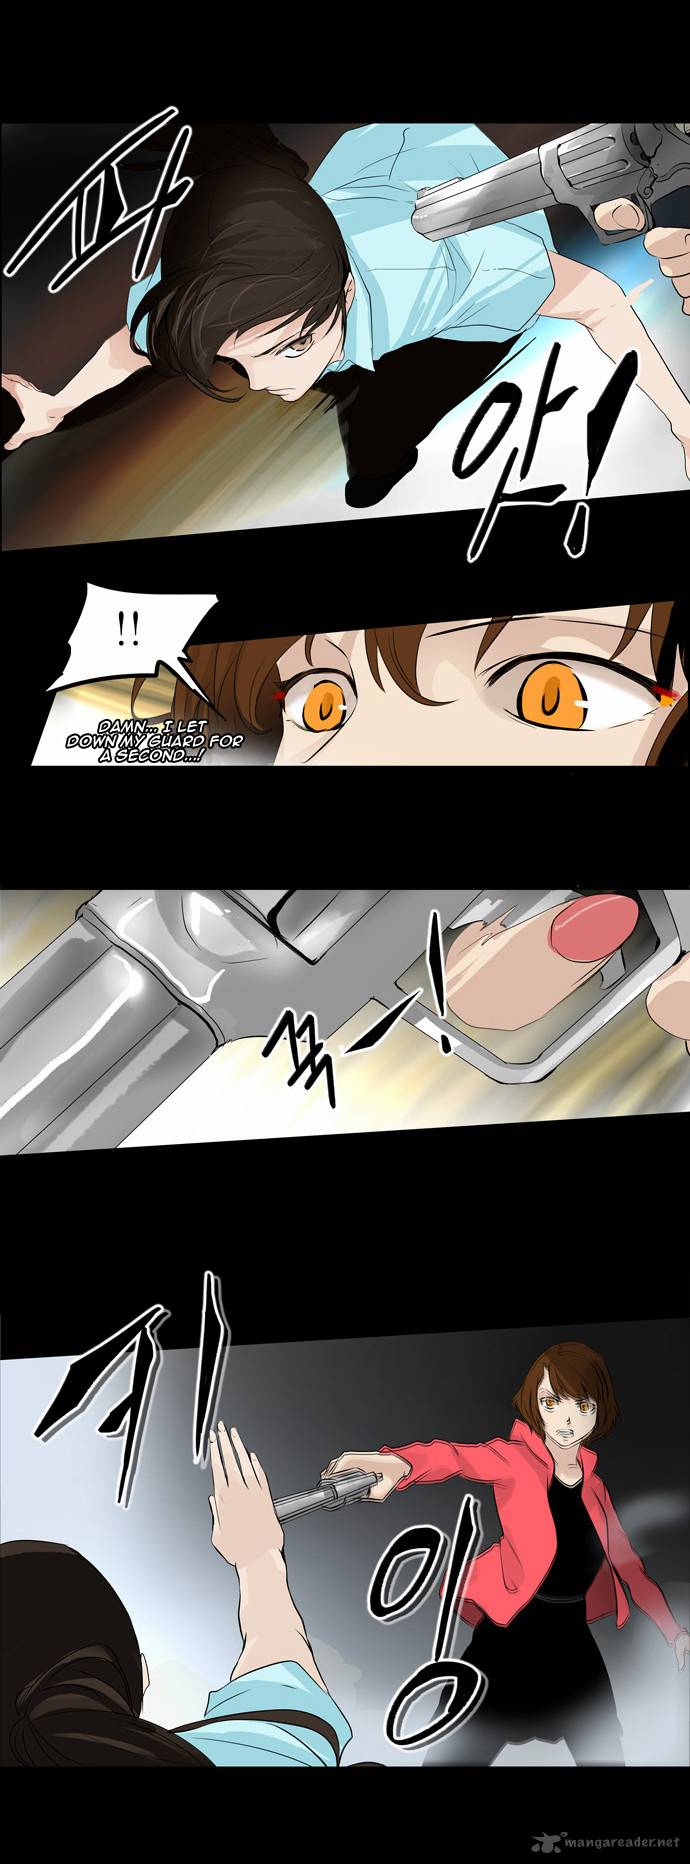 Tower Of God 140 3